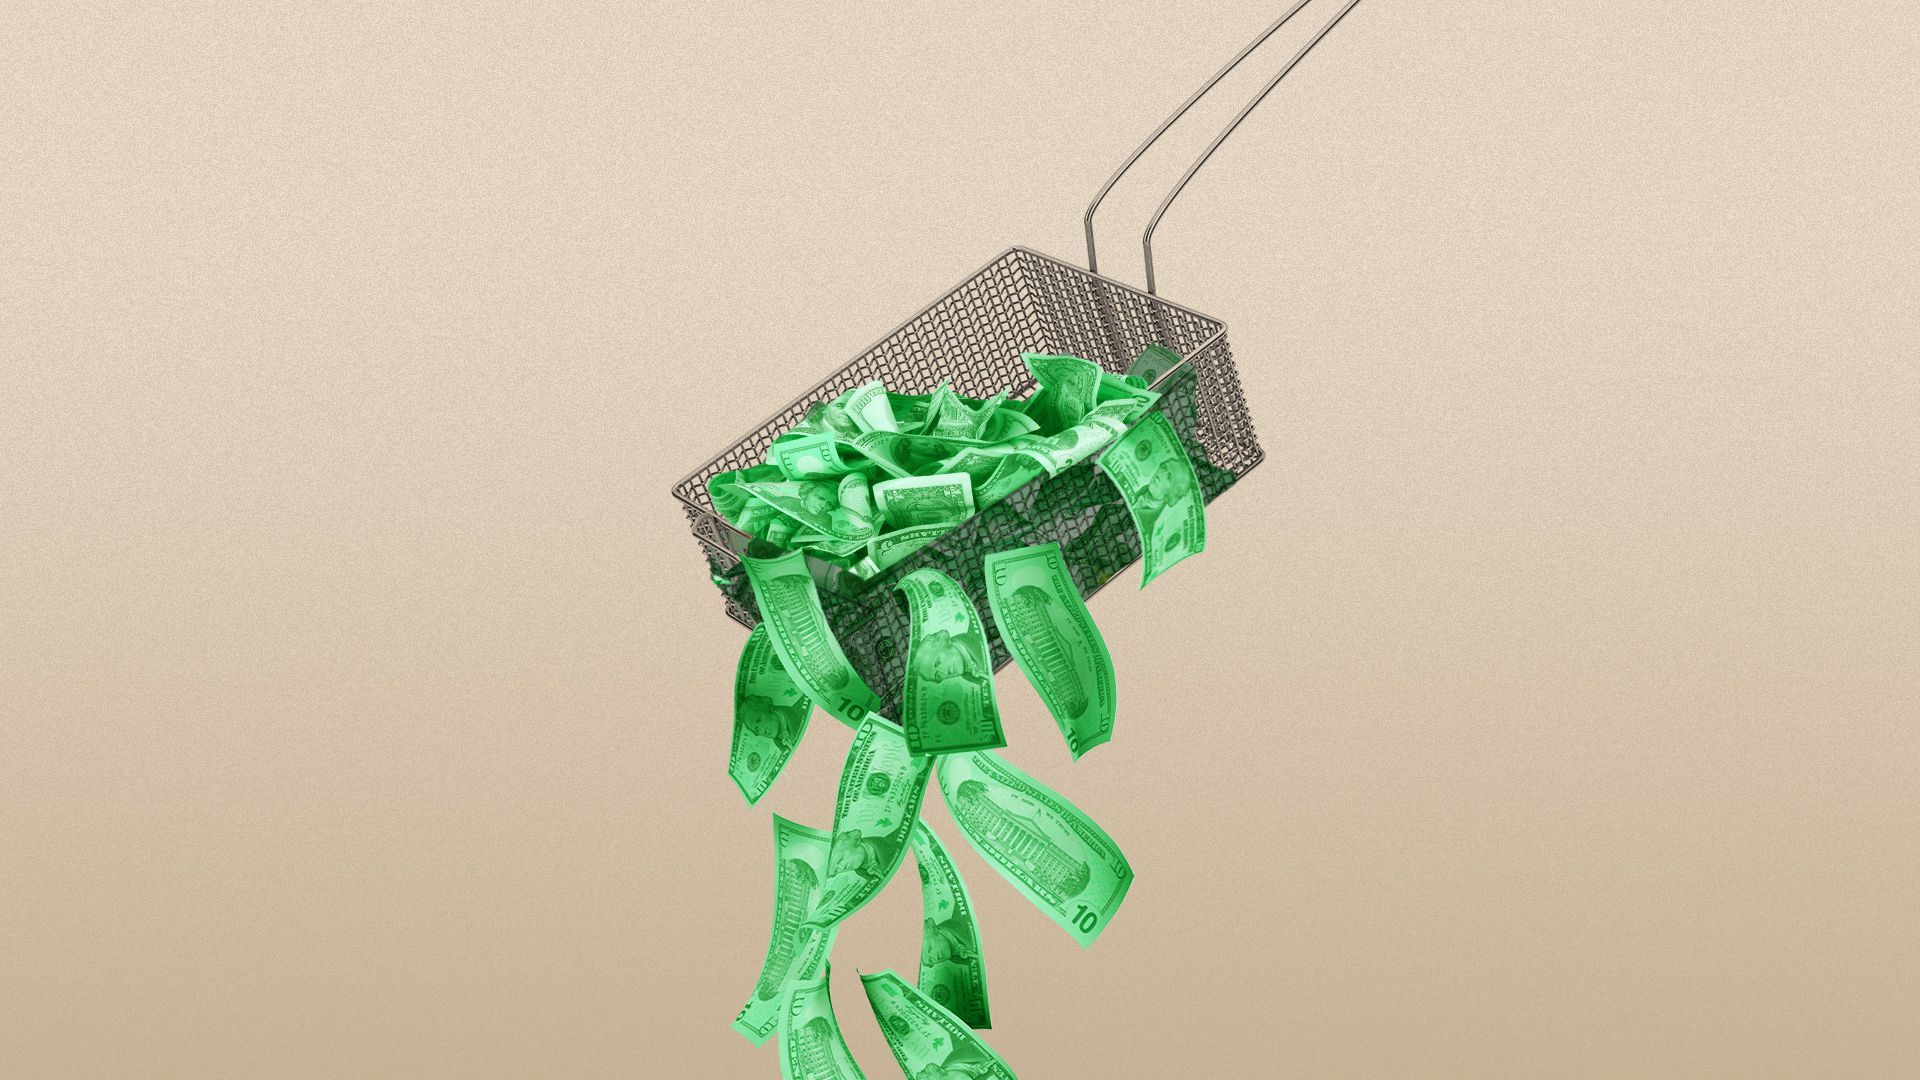 Illustration of a metallic french fry basket pouring out a pile of cash.